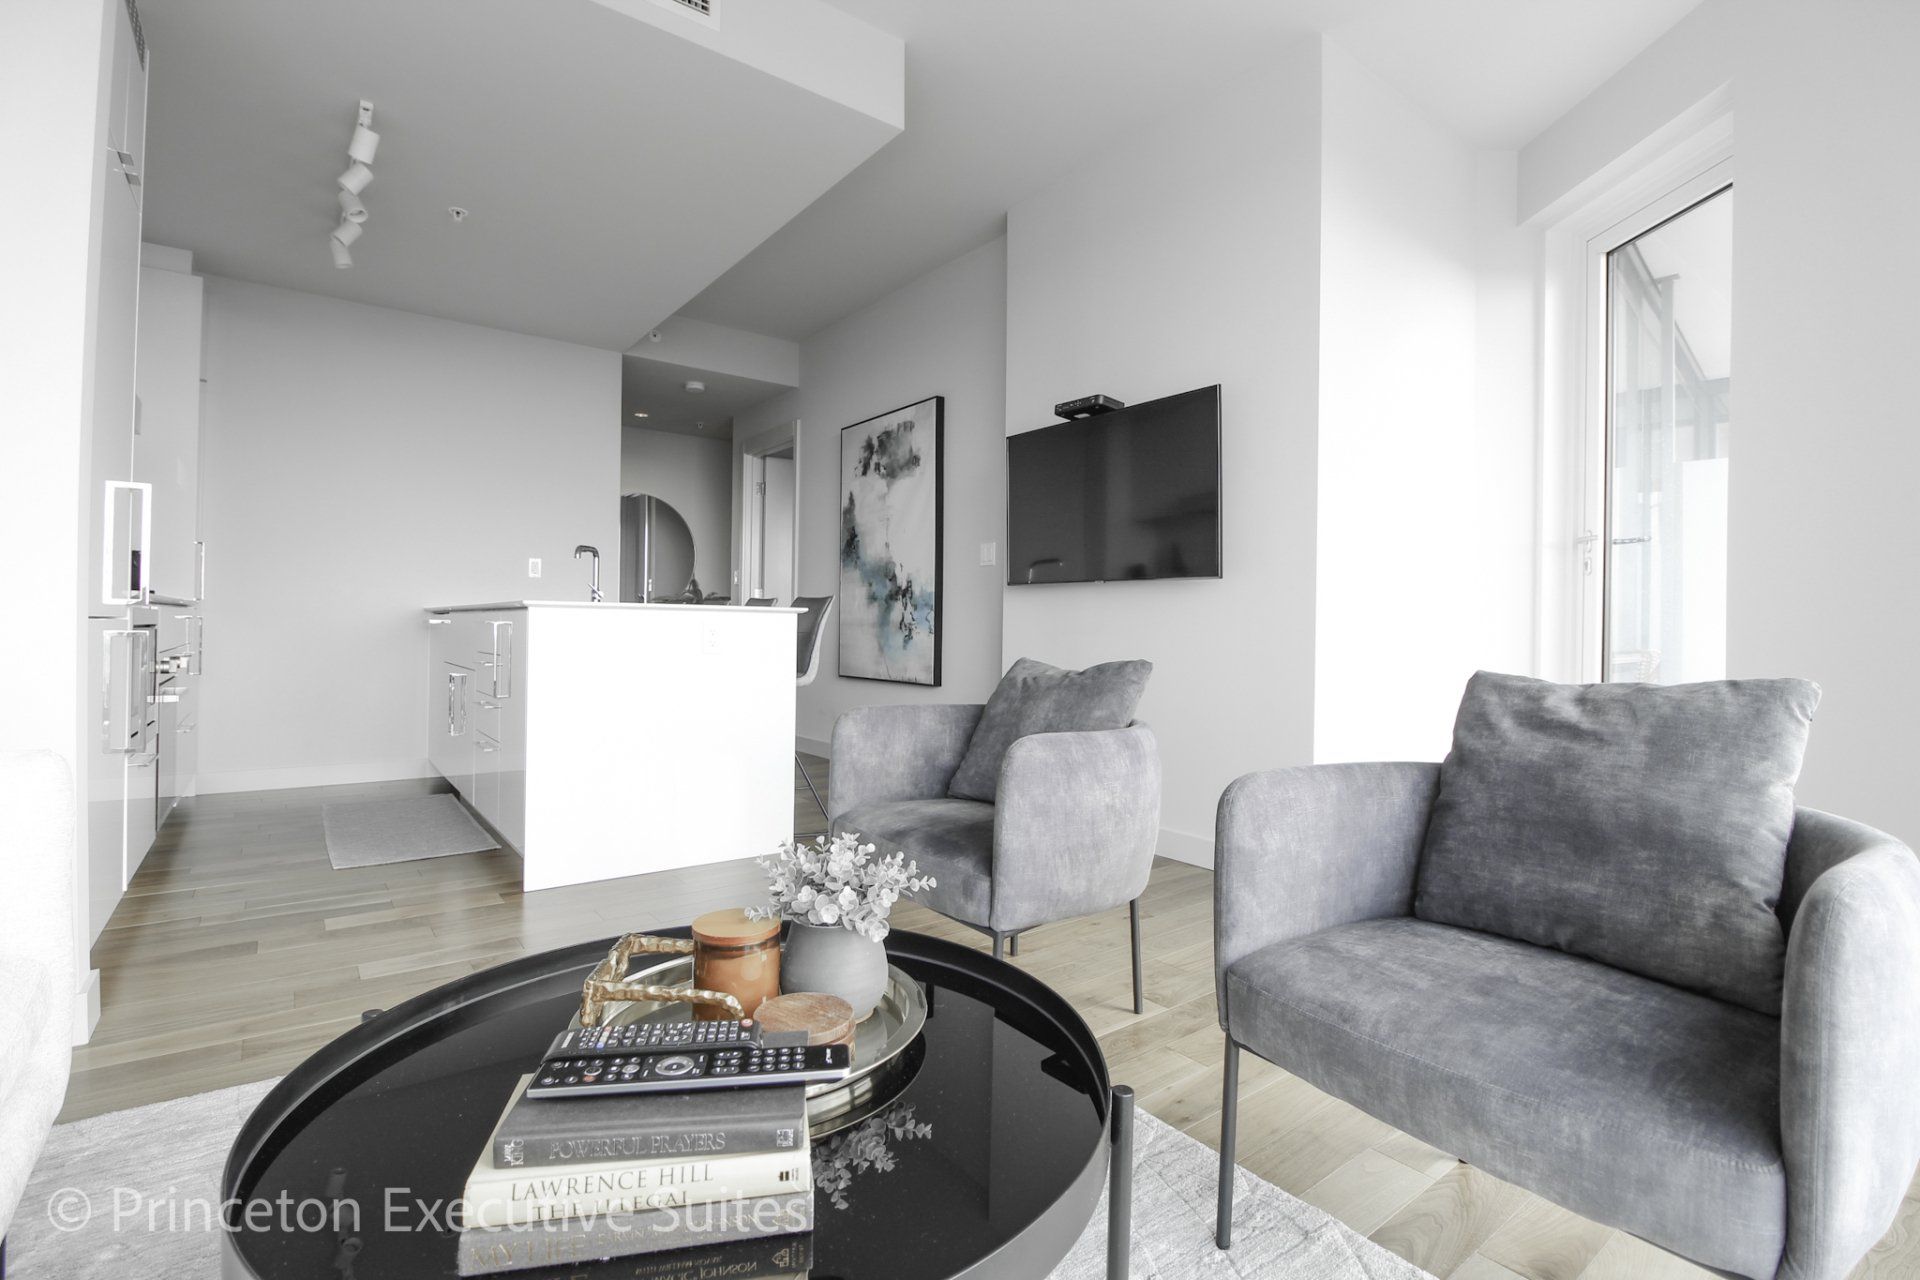 Luxurious living area in this edmonton furnished apartment with white modern kitchen in the back ground.   Grey fabrics accent chairs  in front round smoked glass coffee table.  A large black Led Tv is mounted to the wall in the back ground.